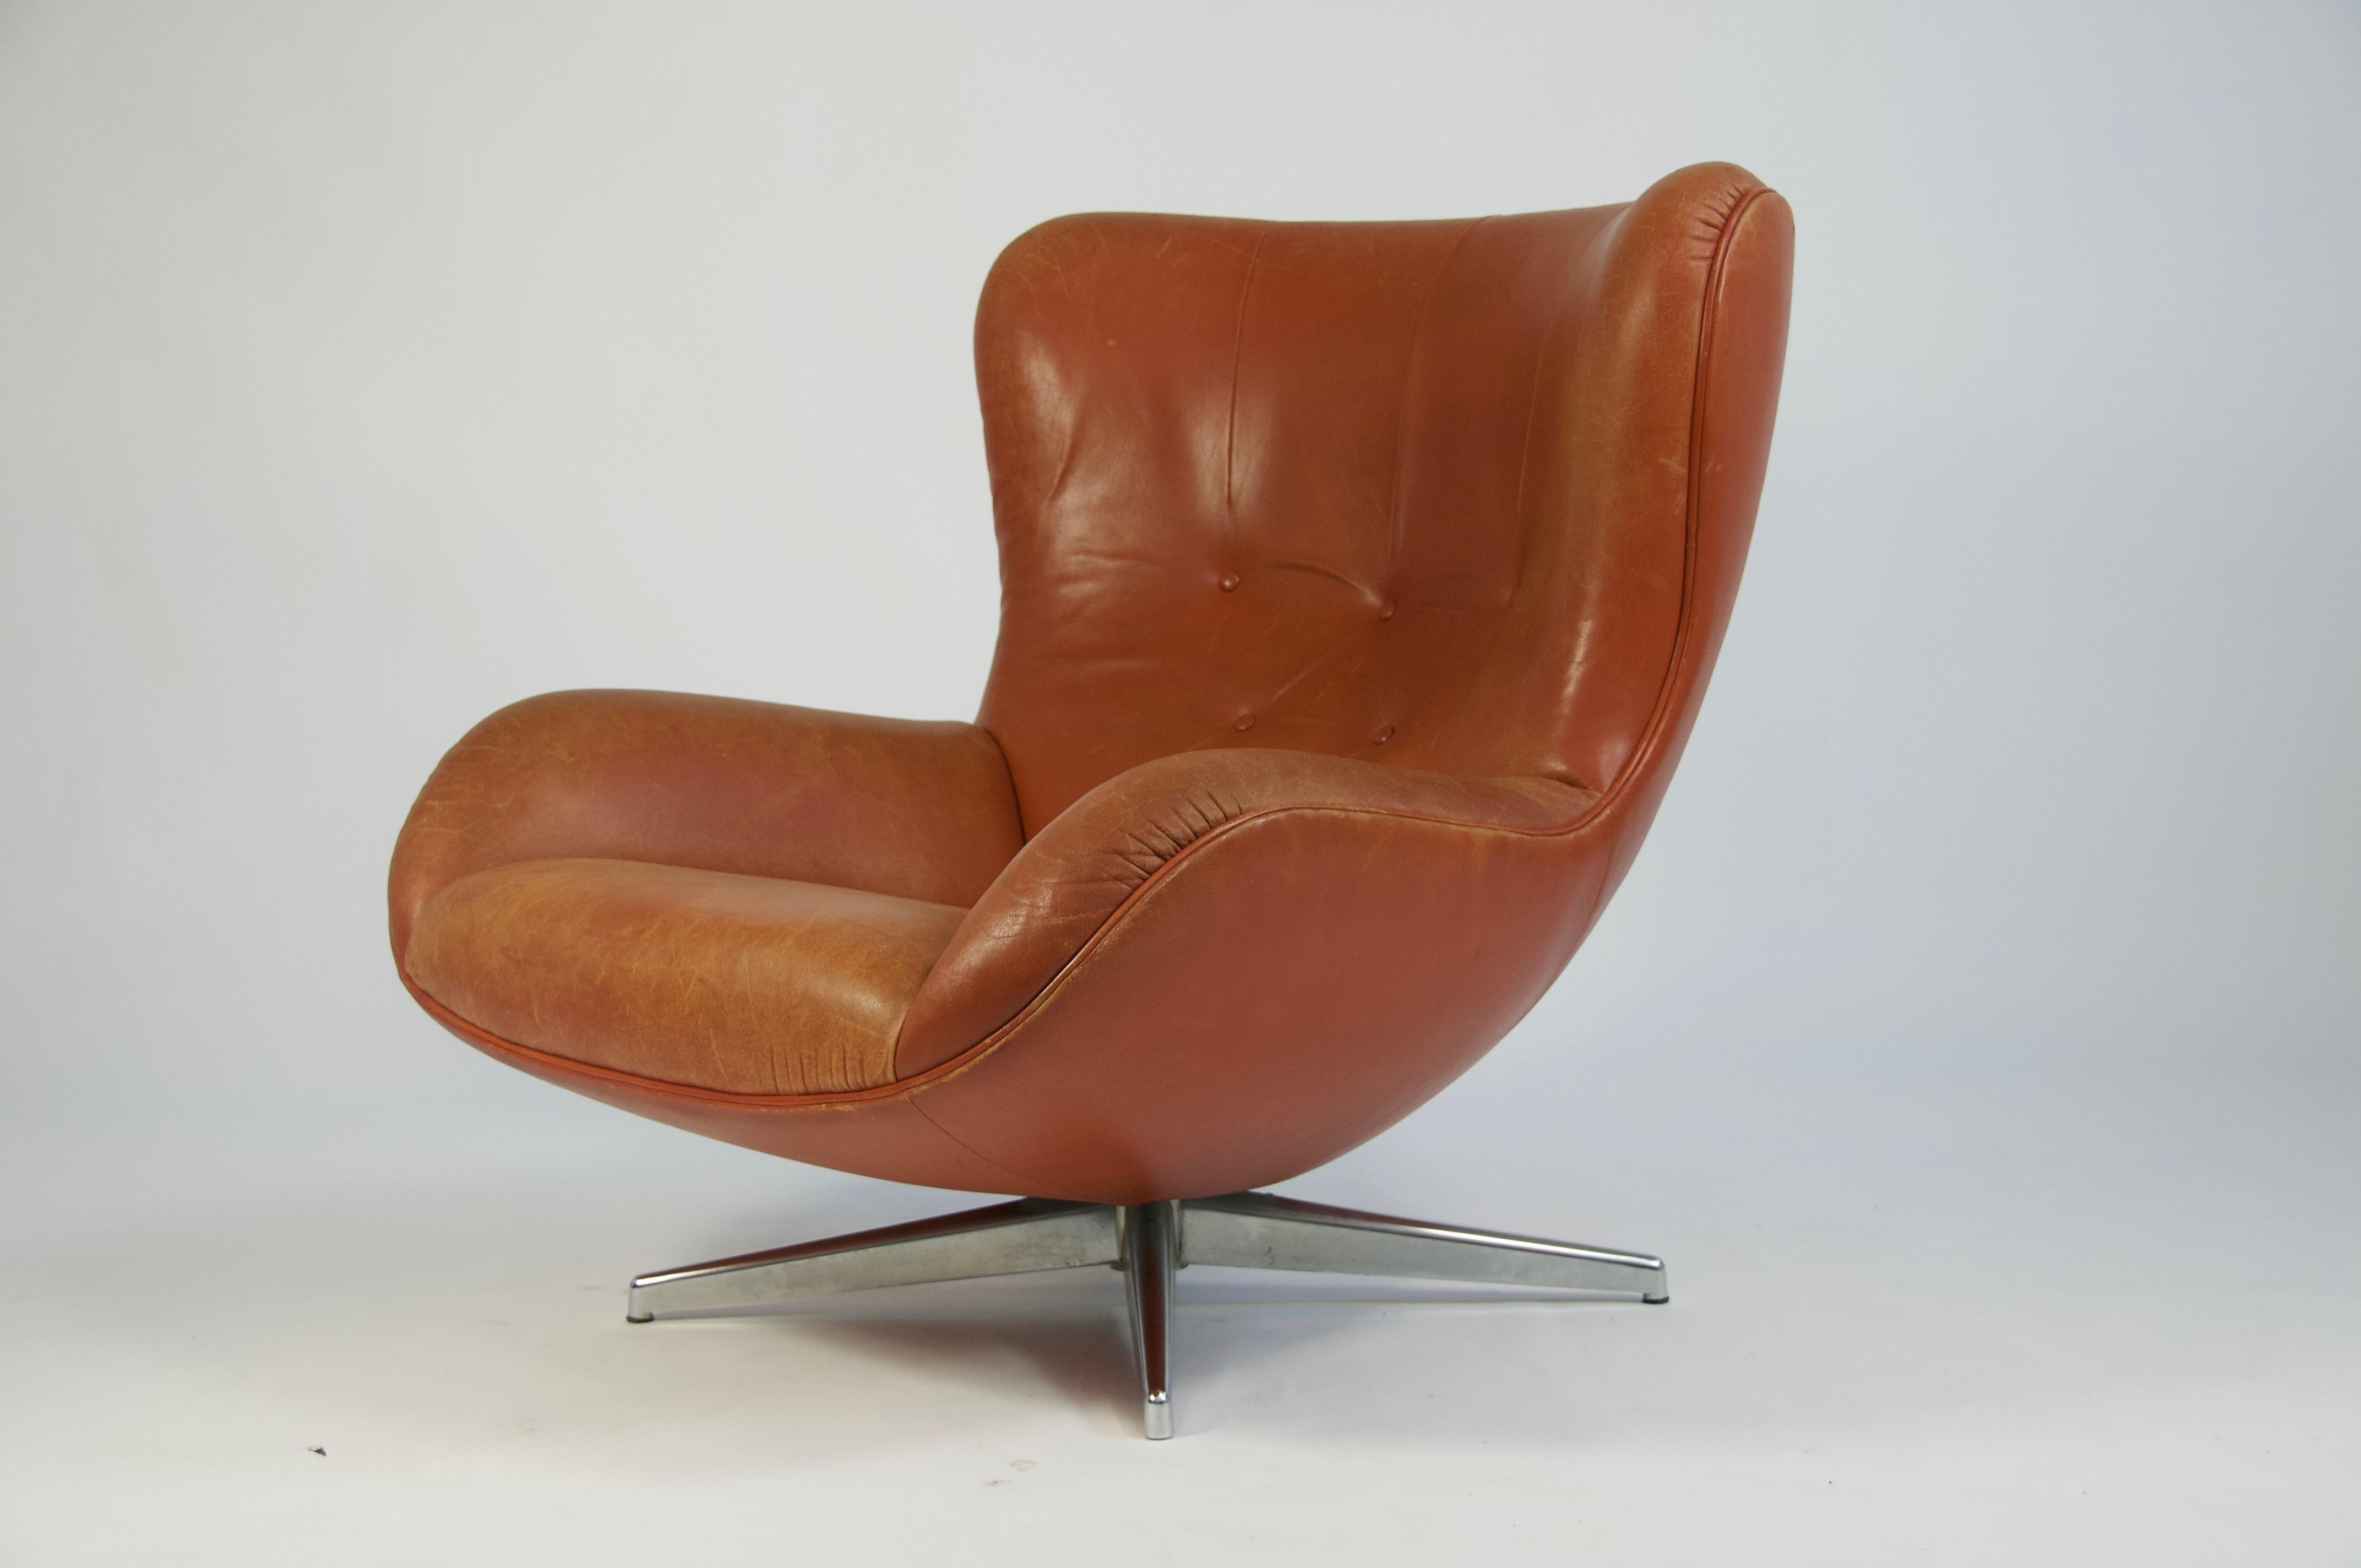 Offered by OLIVER MODERN, Swivel leather lounge chair by Illum Wikkelsø. Model ML 214 Made in Denmark, circa 1960s. Original patinated brown leather.